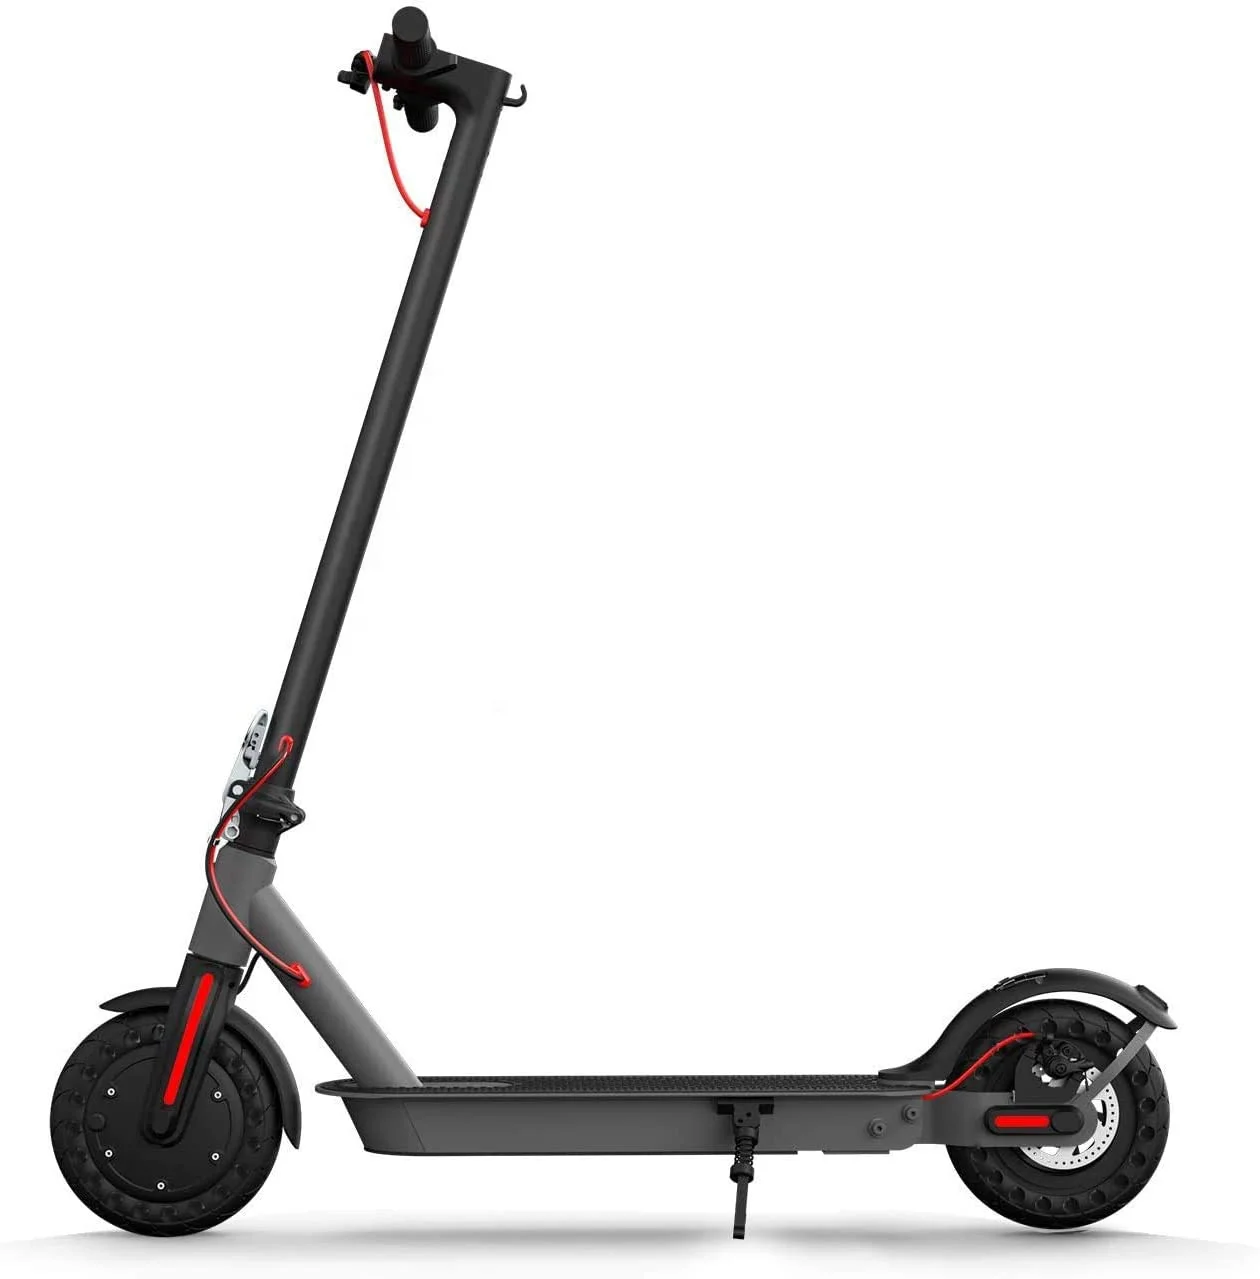 

DDP Free Duty eu europe Germany warehouse 36v 350w Skateboard Foldable motorcycle E scooter adult Electric Scooter